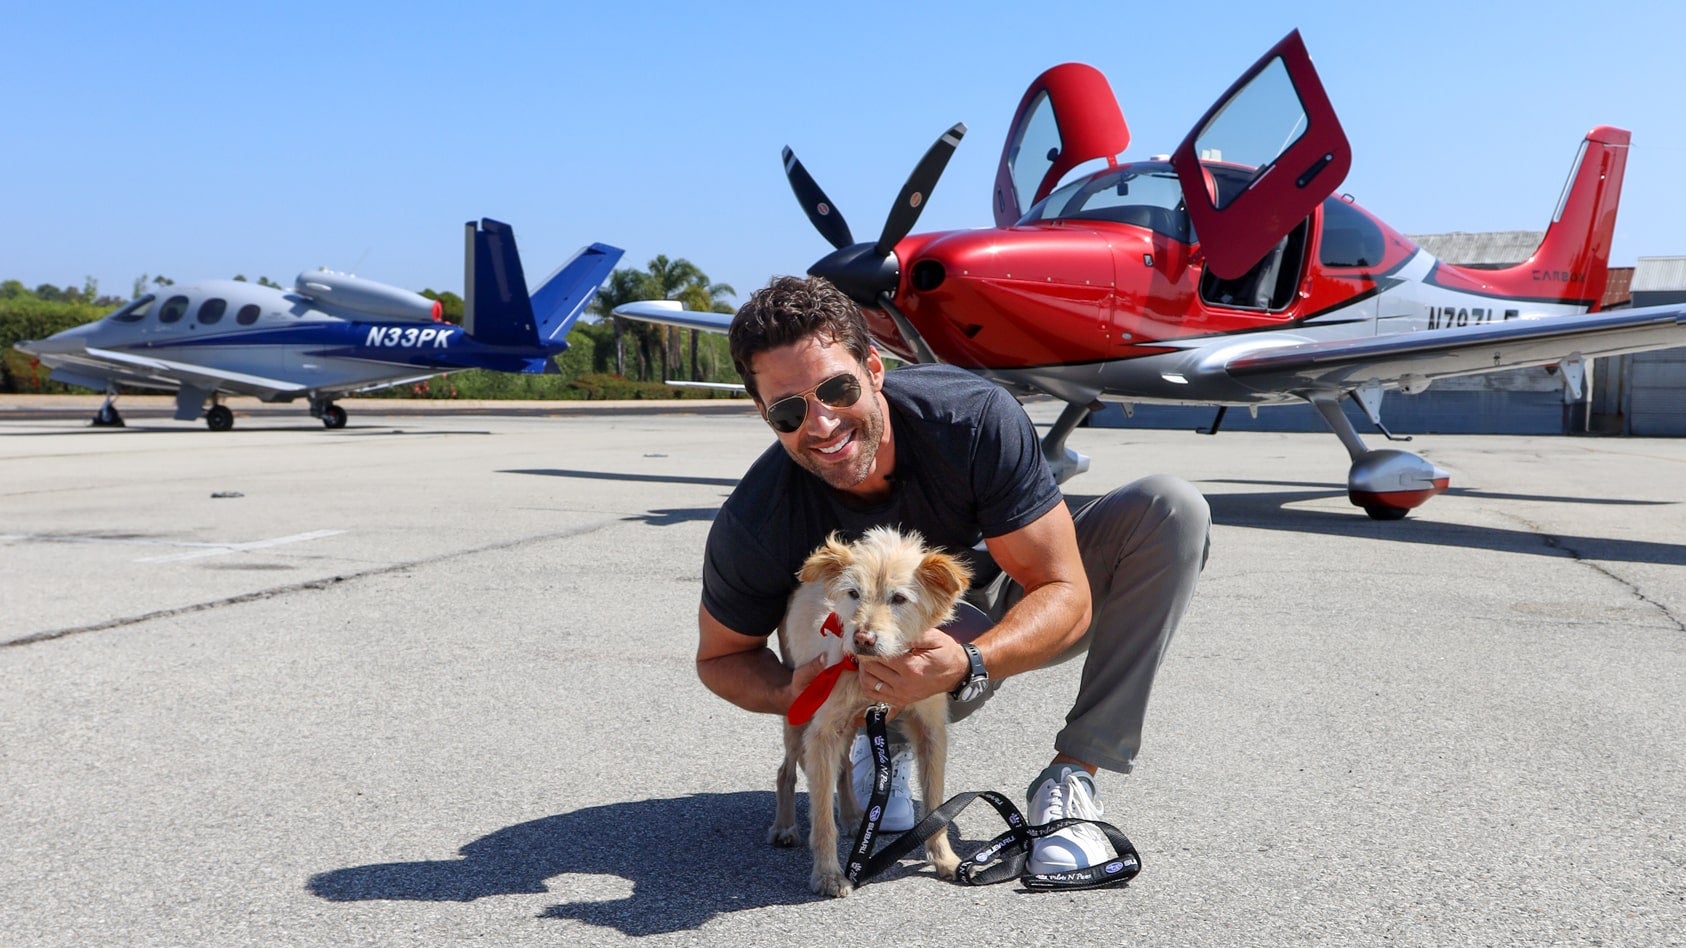 Top Five Tips for Flying with Dogs from Pilots ‘N Paws Volunteer Aaron O’Connell